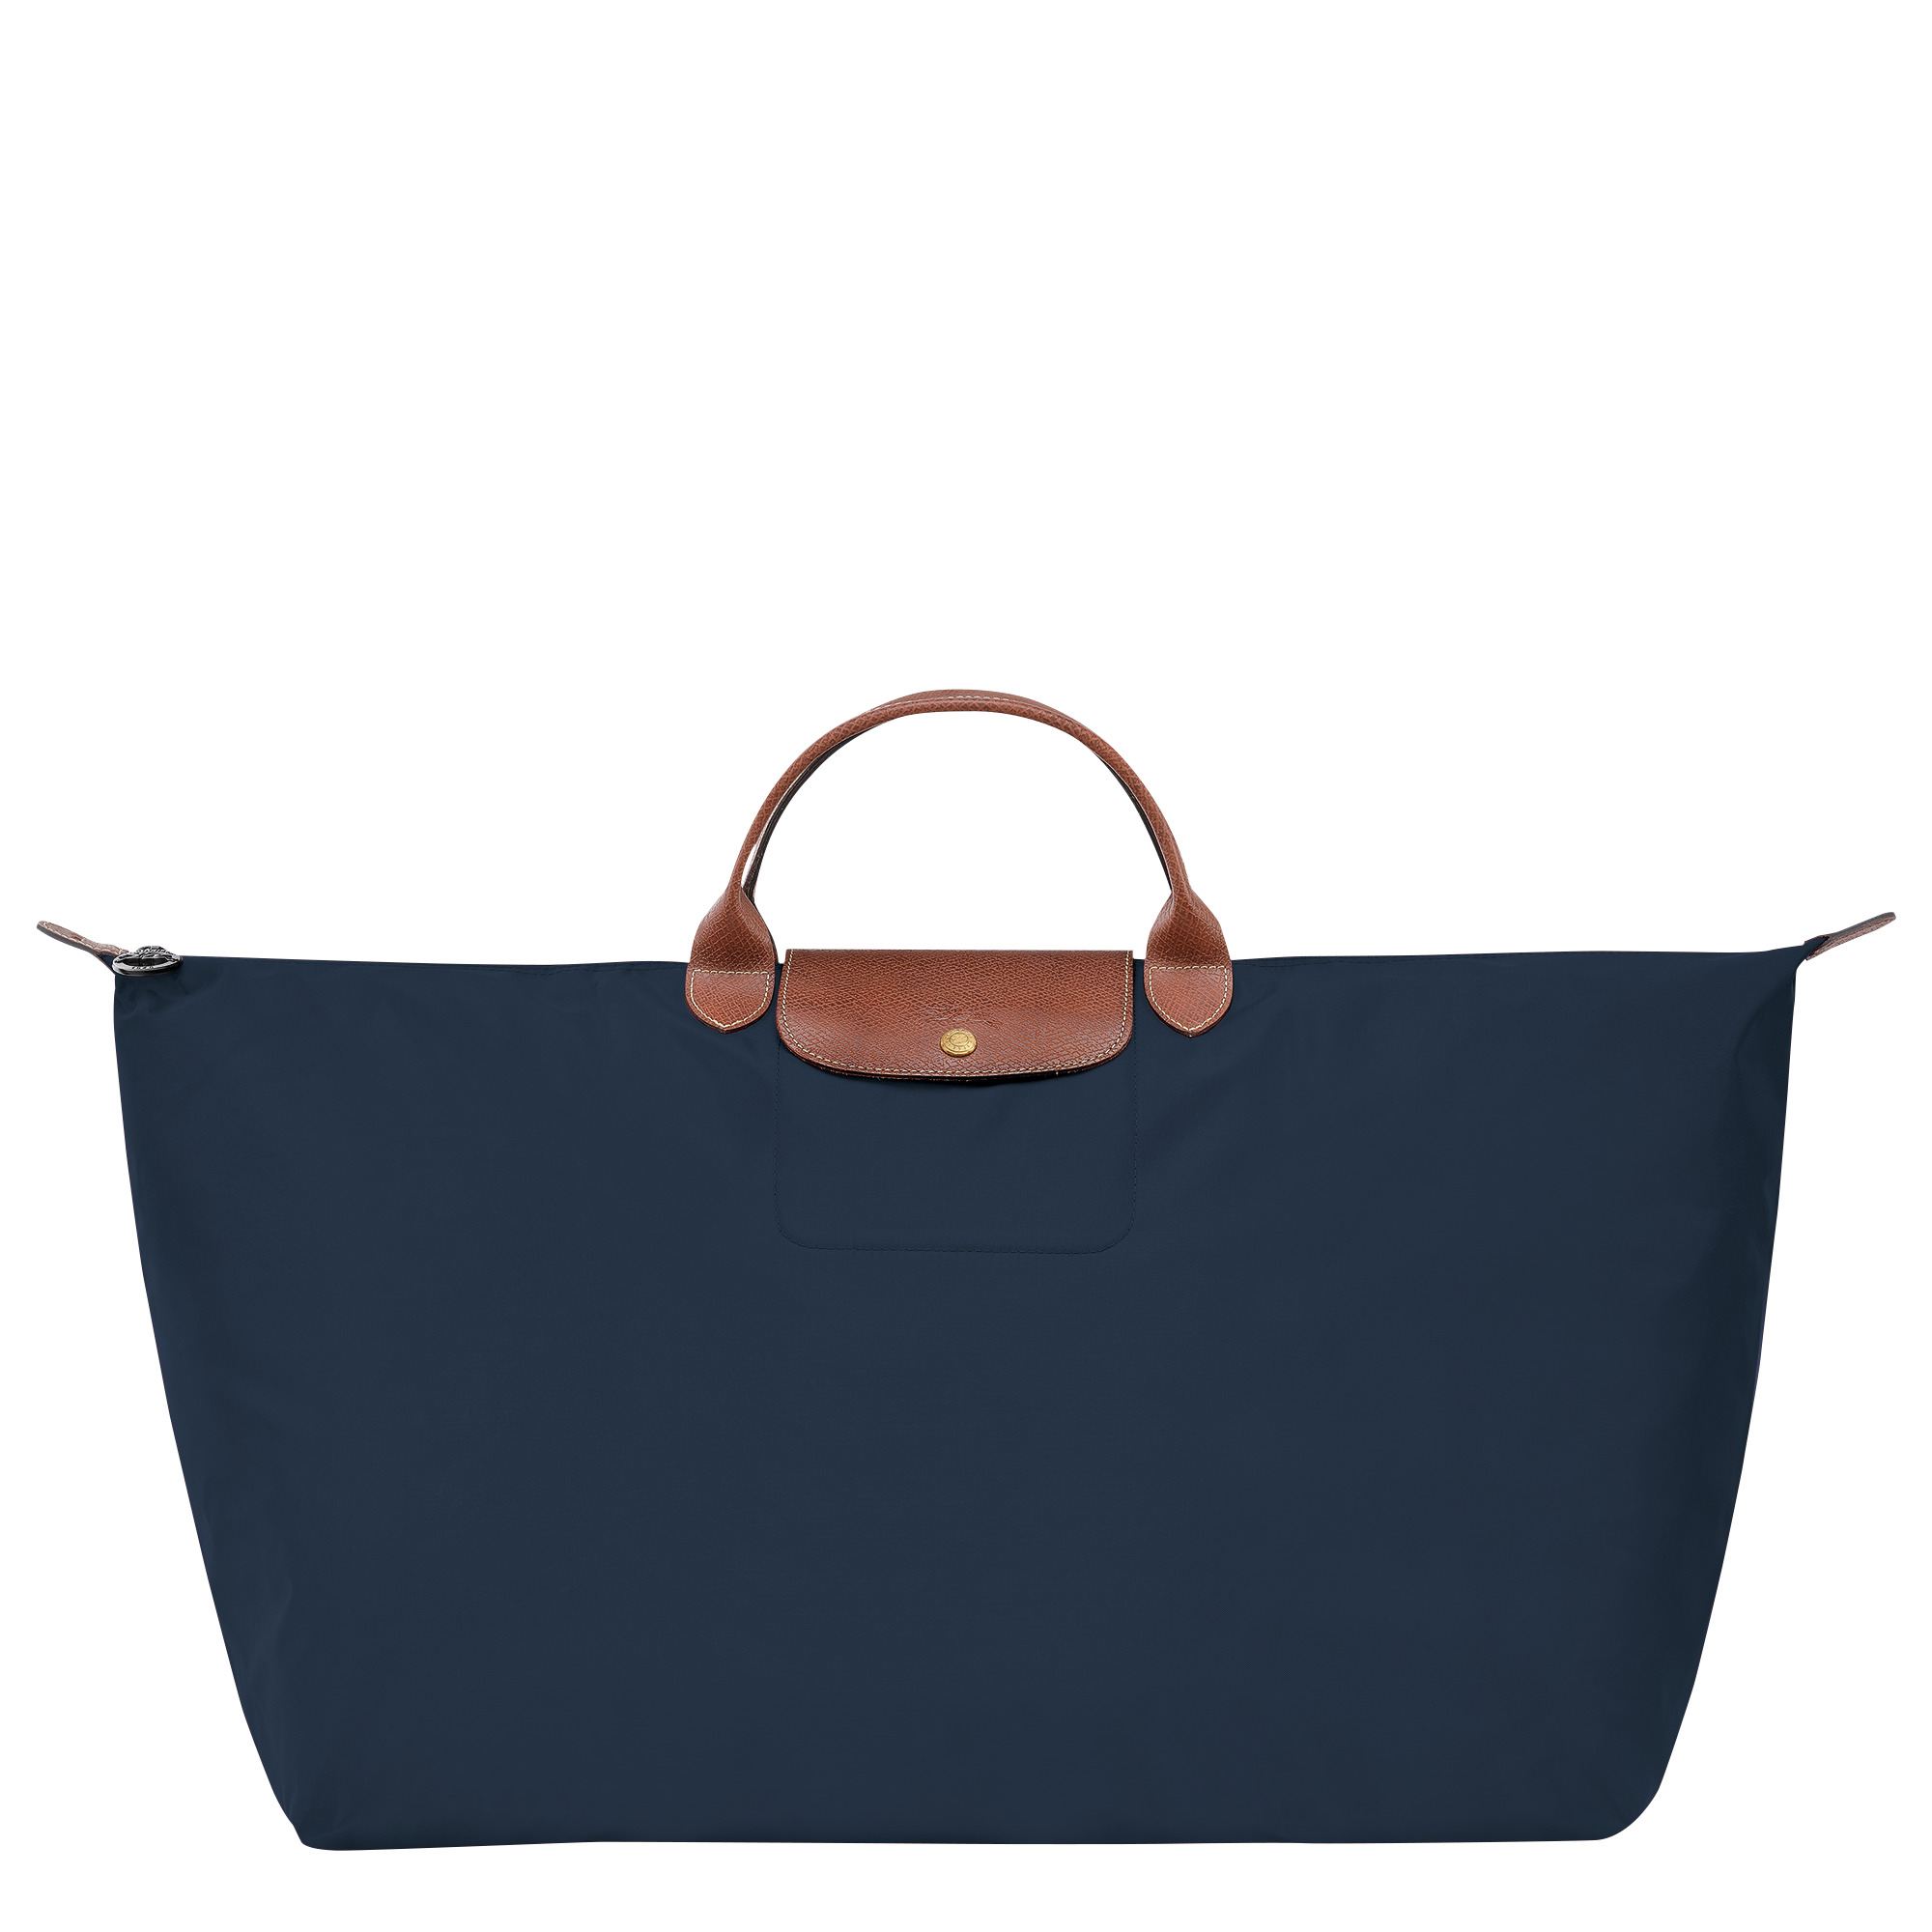 Le Pliage Original M Travel bag Navy - Recycled canvas - 1